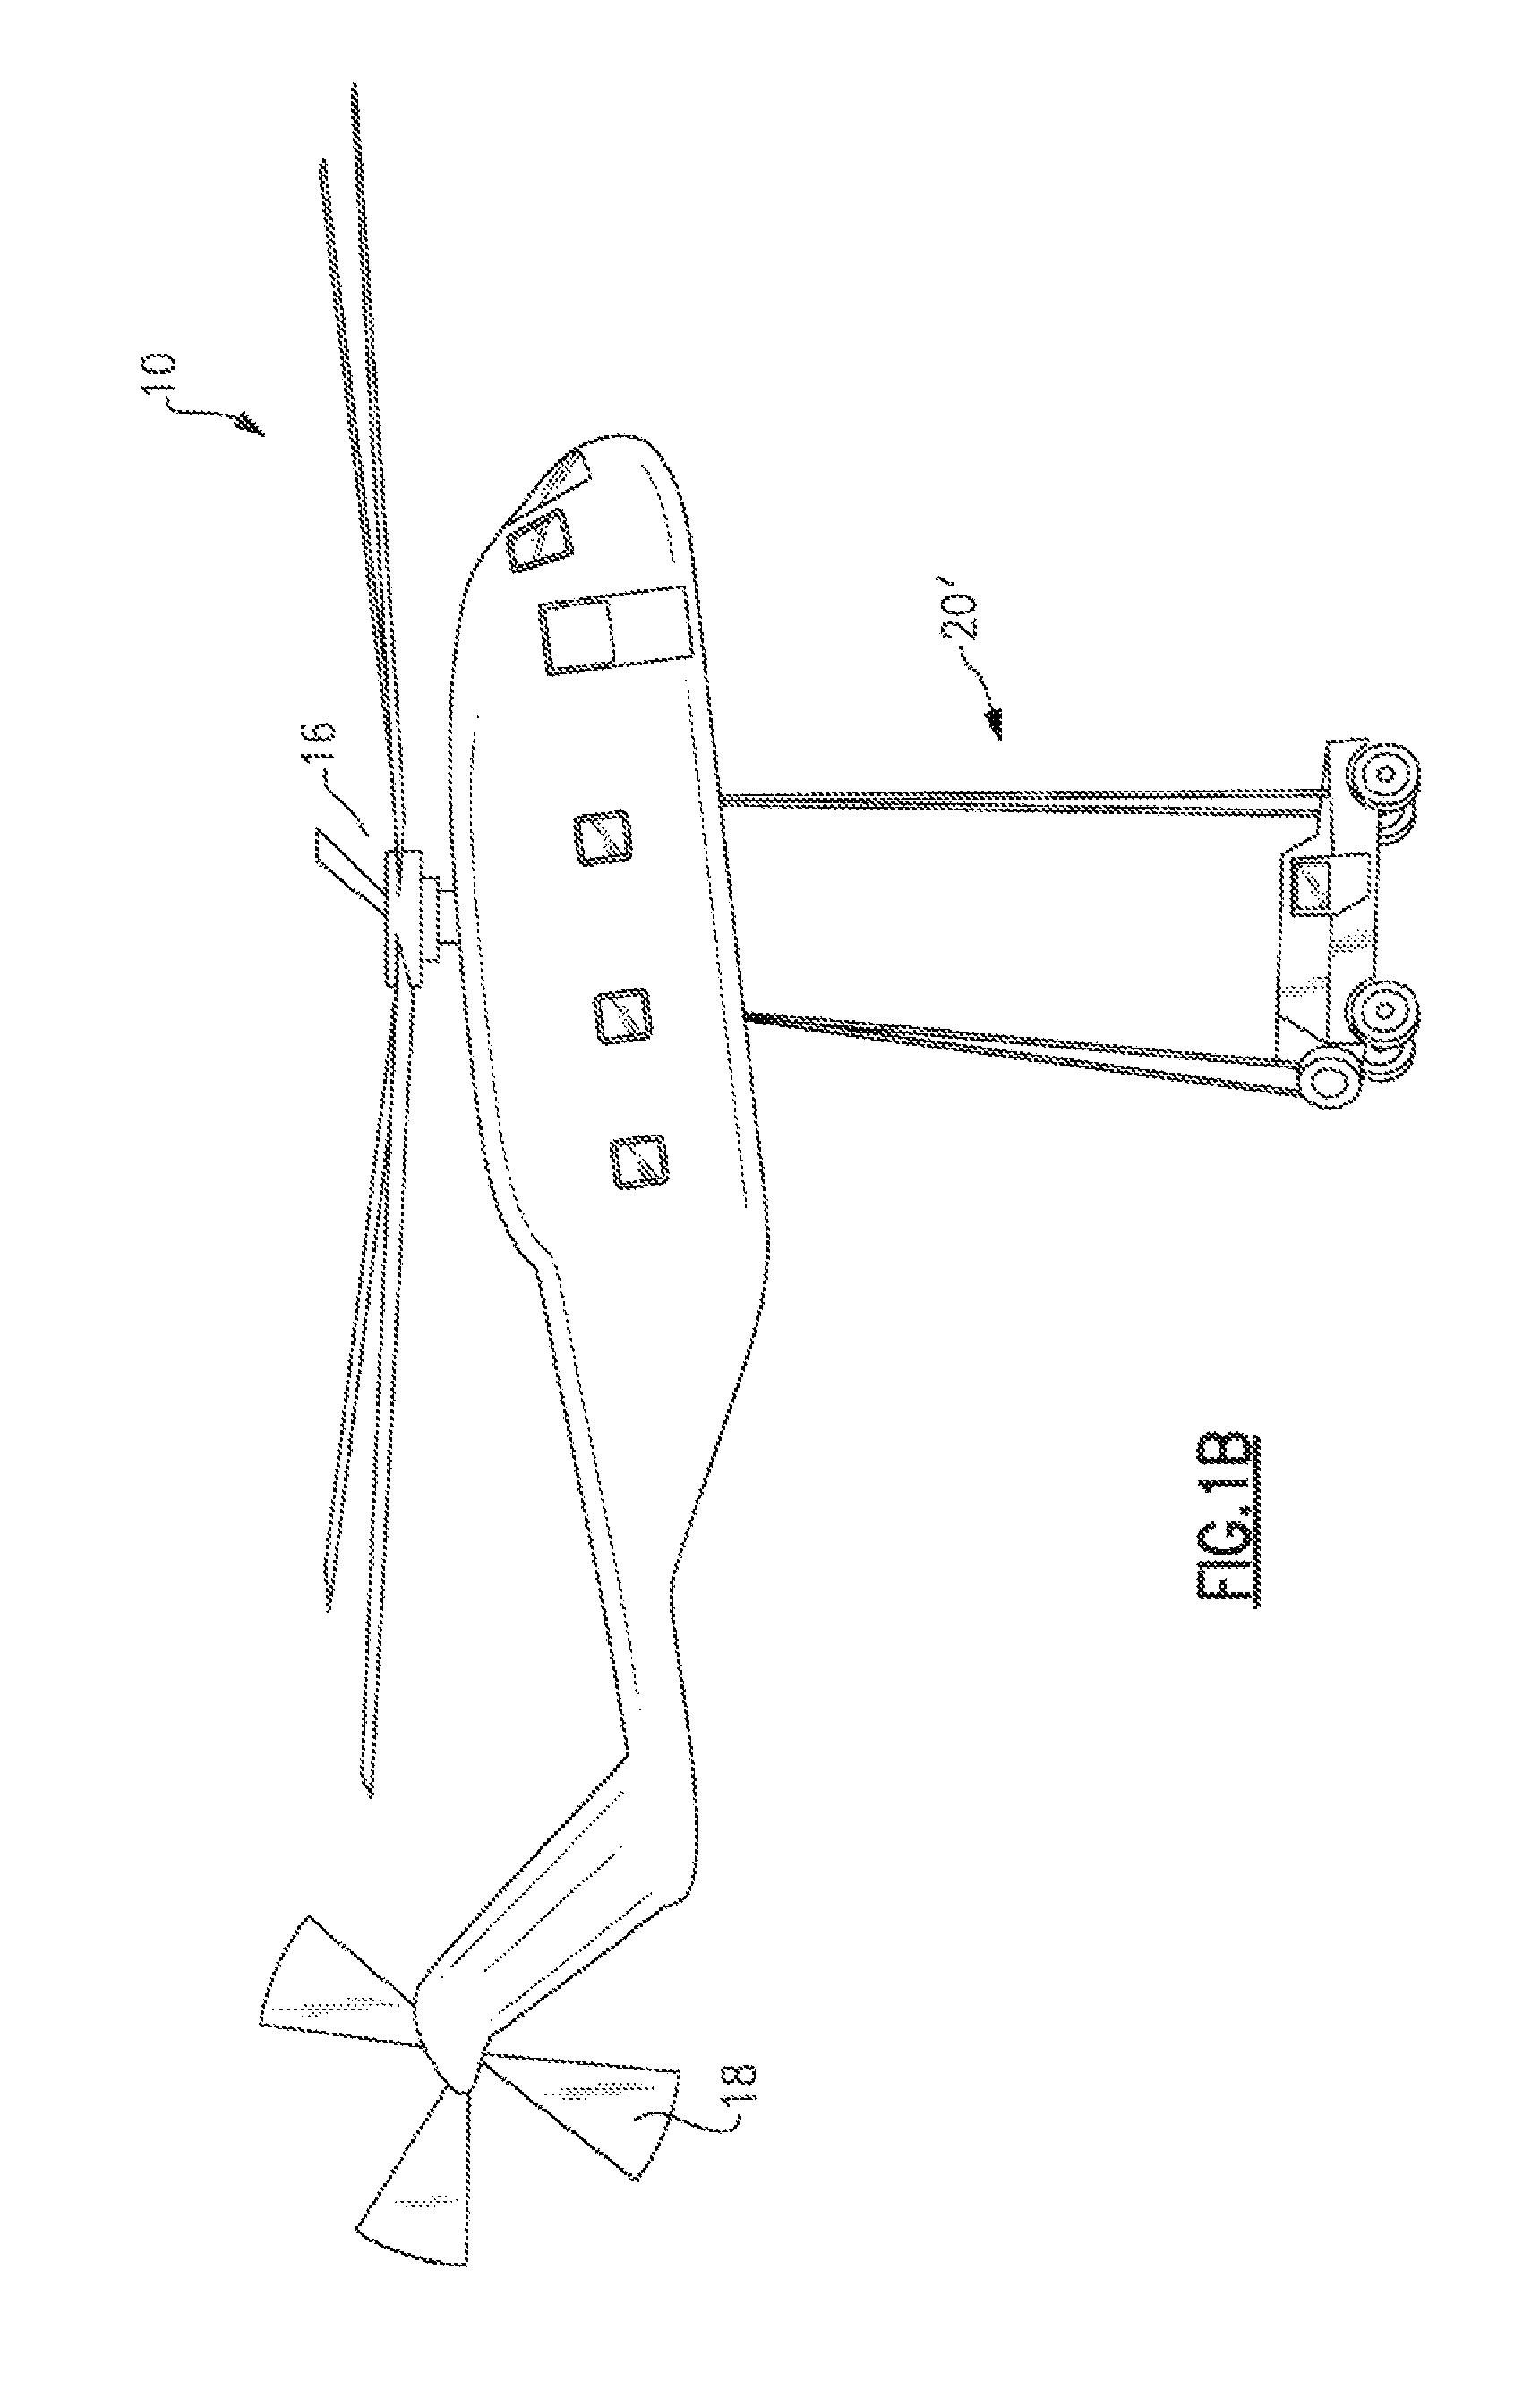 System and method for improved rotary-wing aircraft performance with interior/external loads